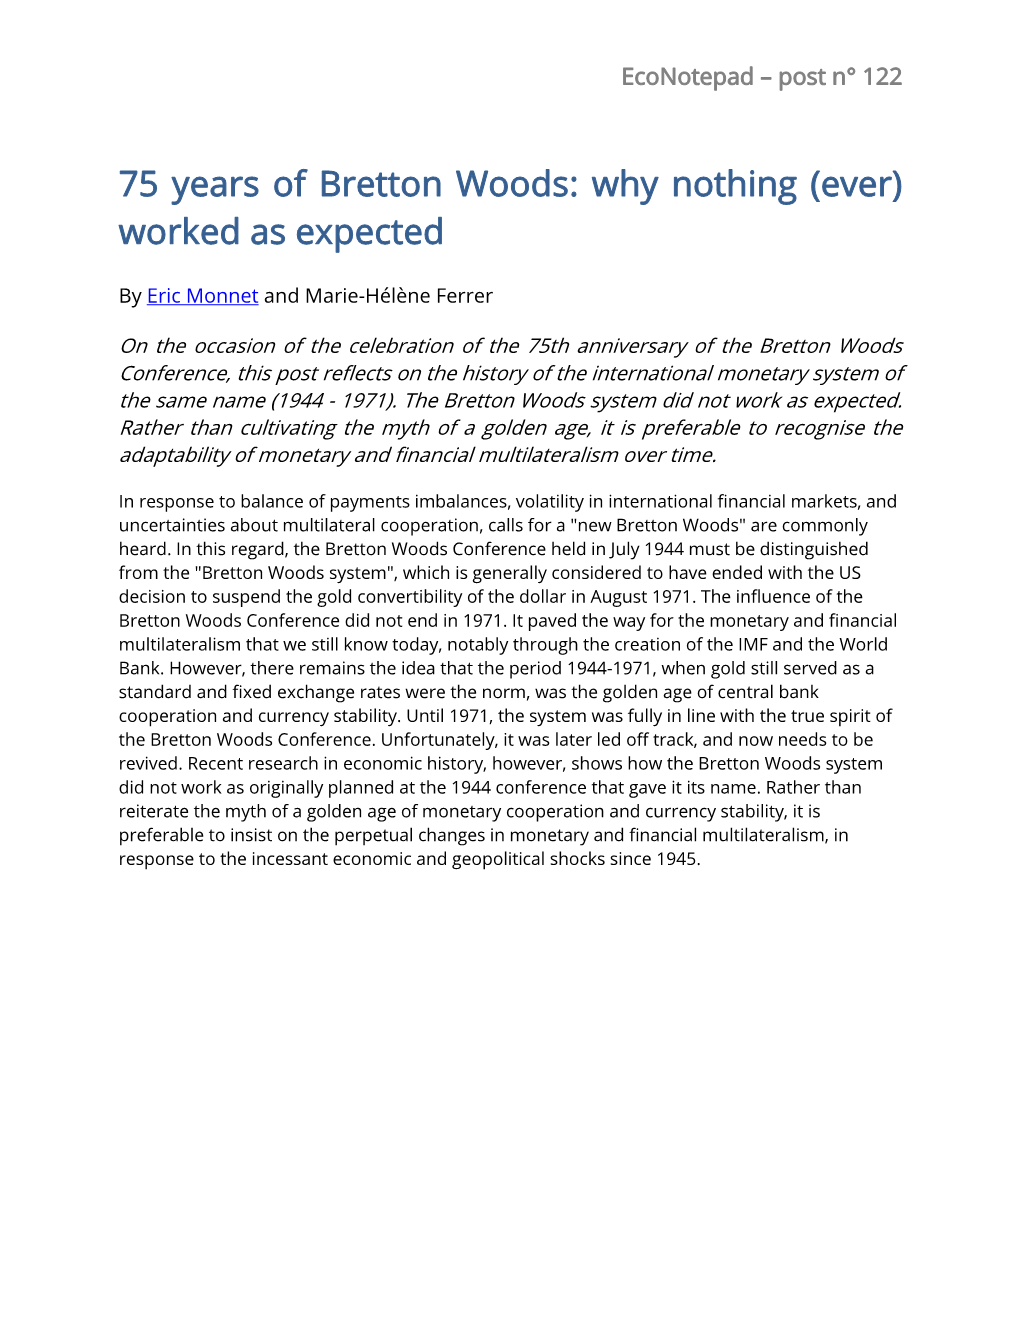 75 Years of Bretton Woods: Why Nothing (Ever) Worked As Expected